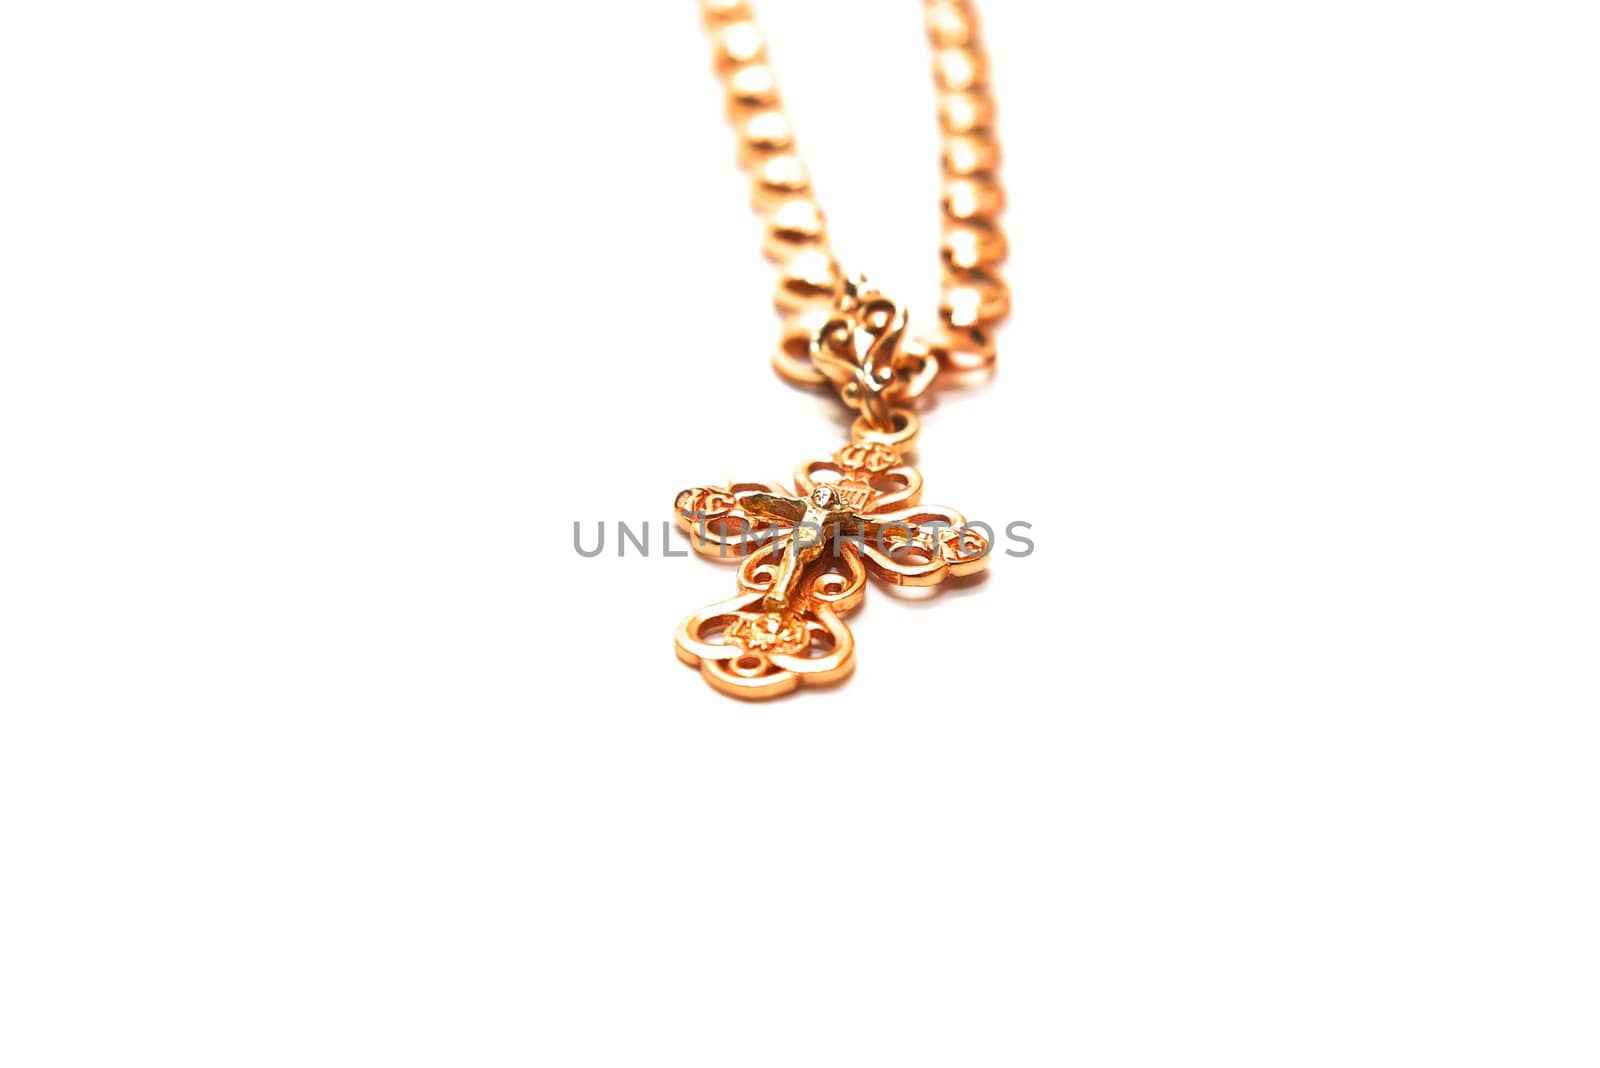 photo of the gold cross on white background